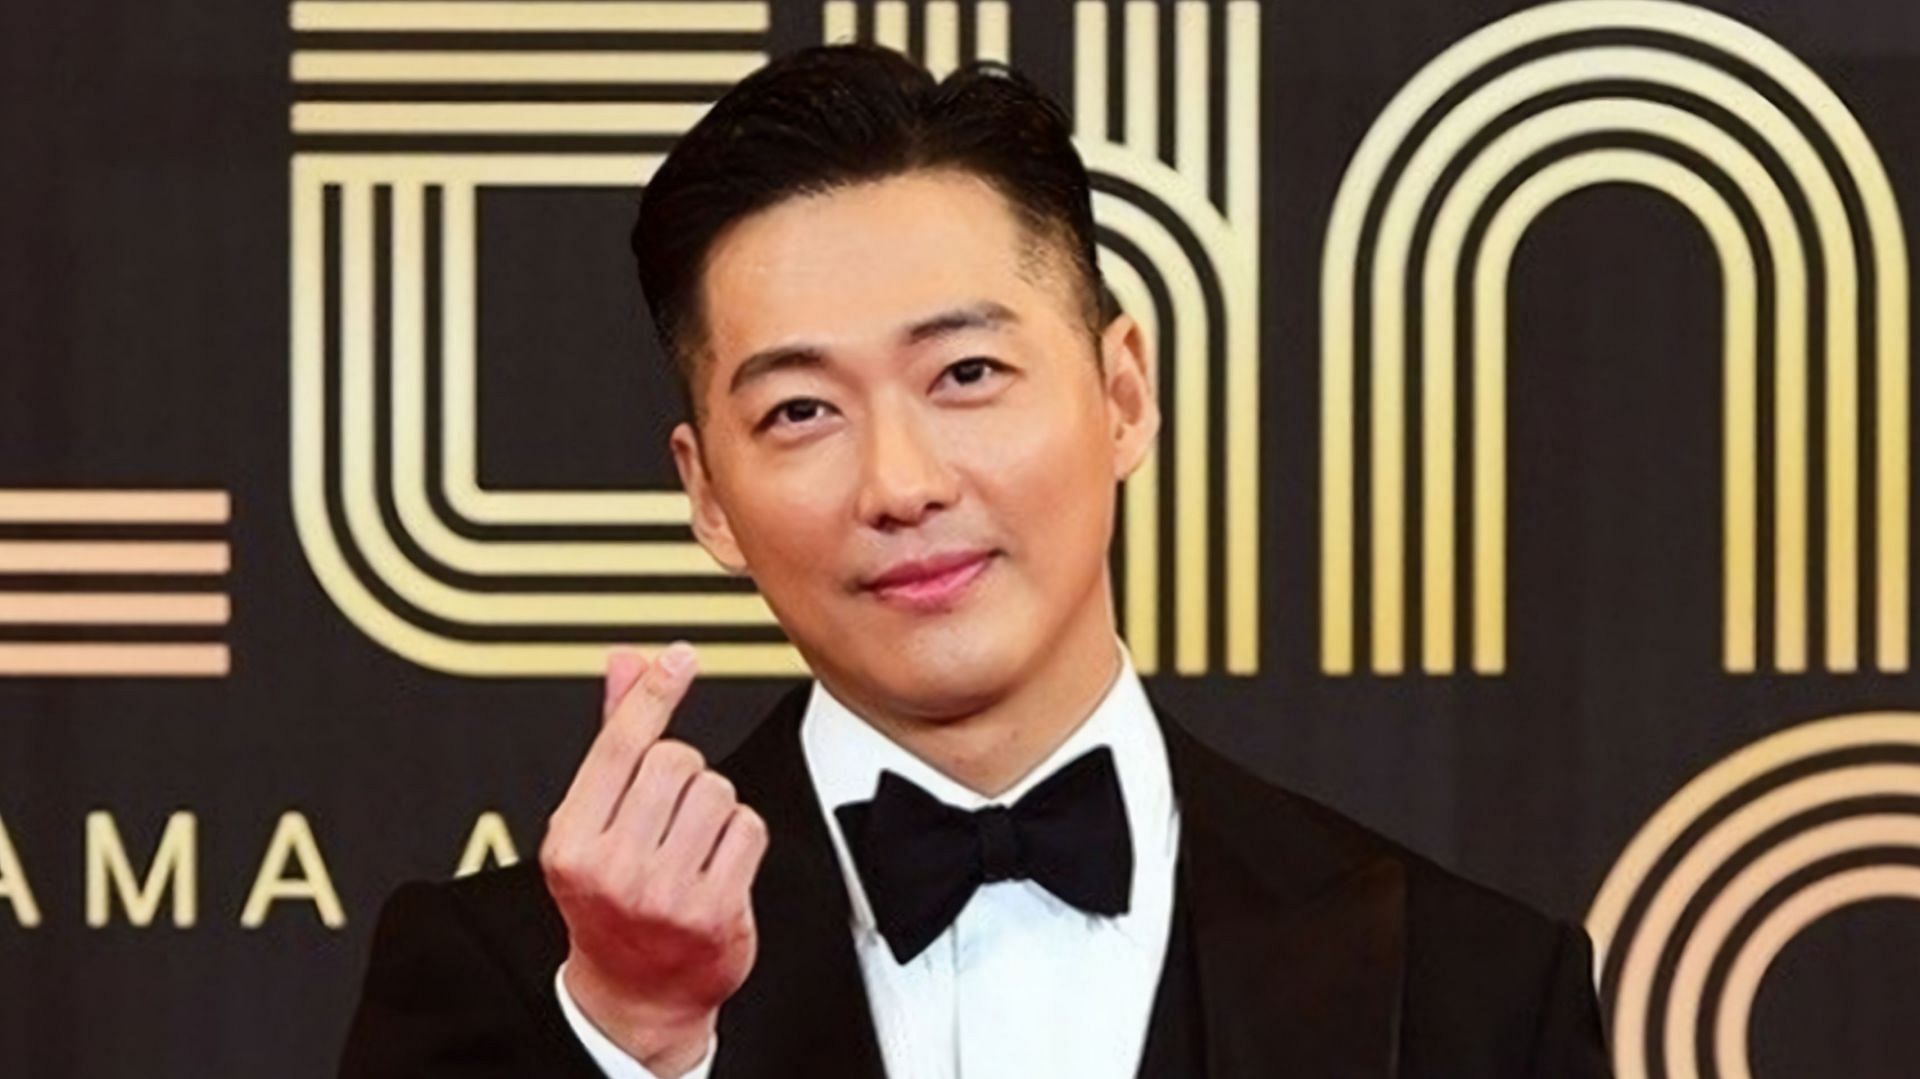 The actor has taken home the Daesang two years in a row (Image via MBC)